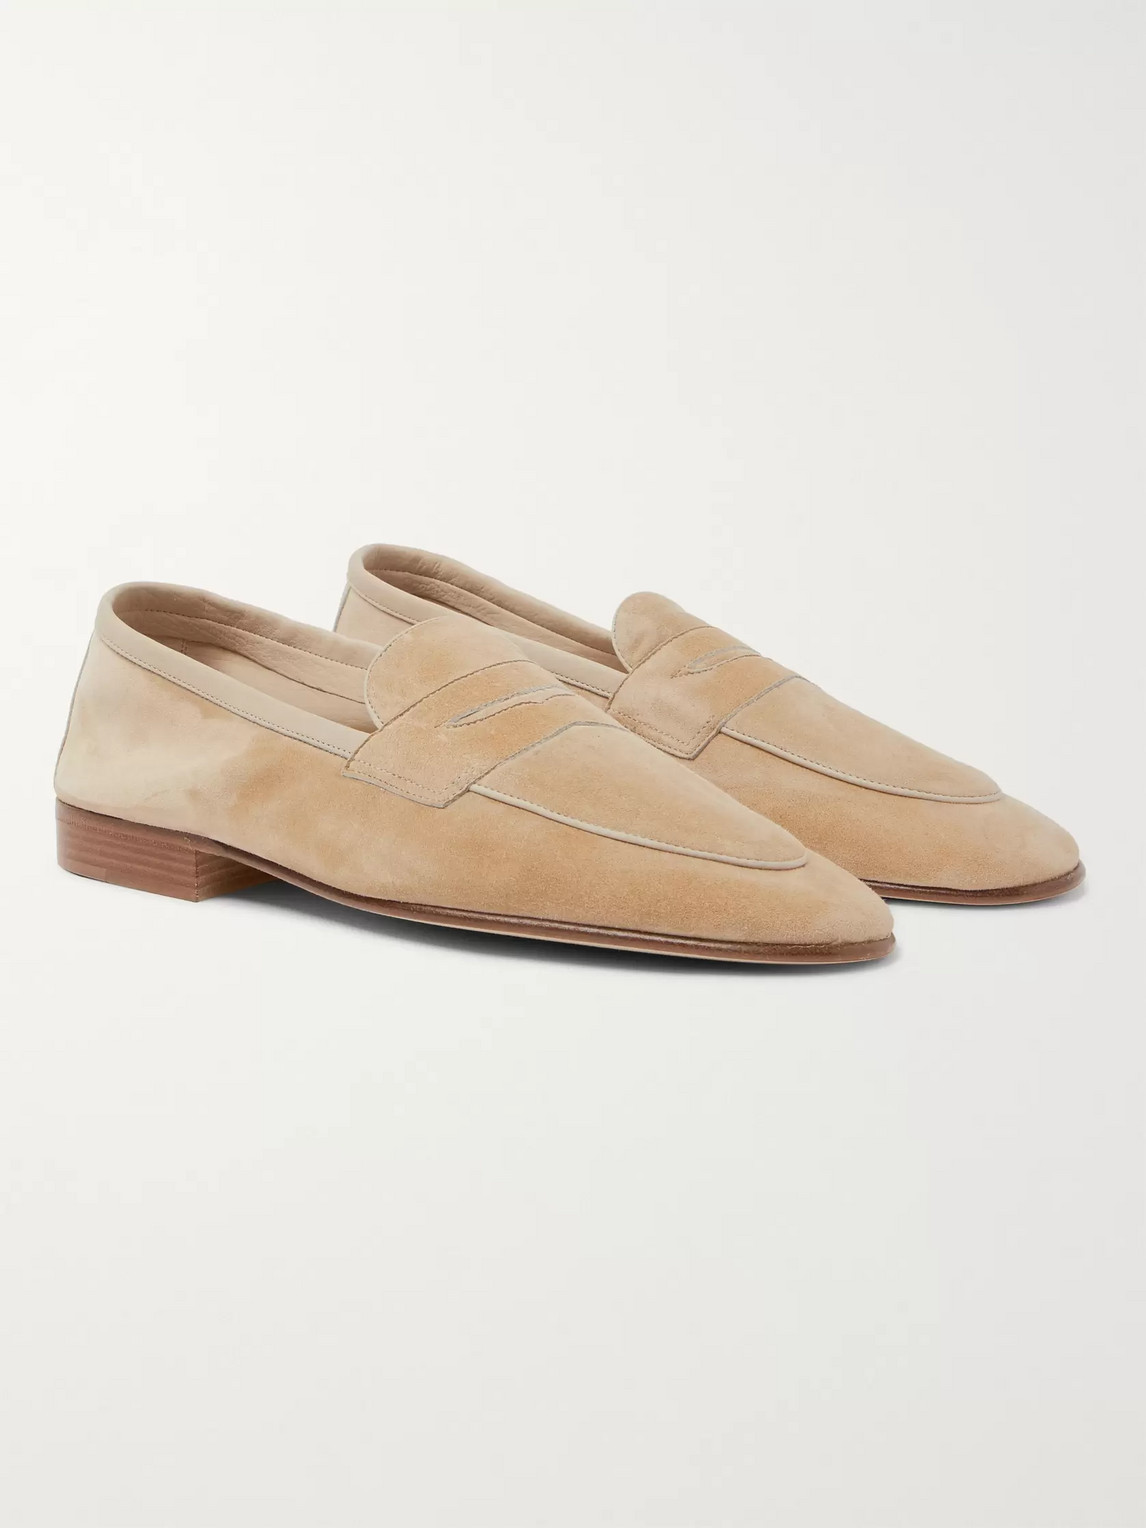 EDWARD GREEN POLPERRO LEATHER-TRIMMED SUEDE PENNY LOAFERS